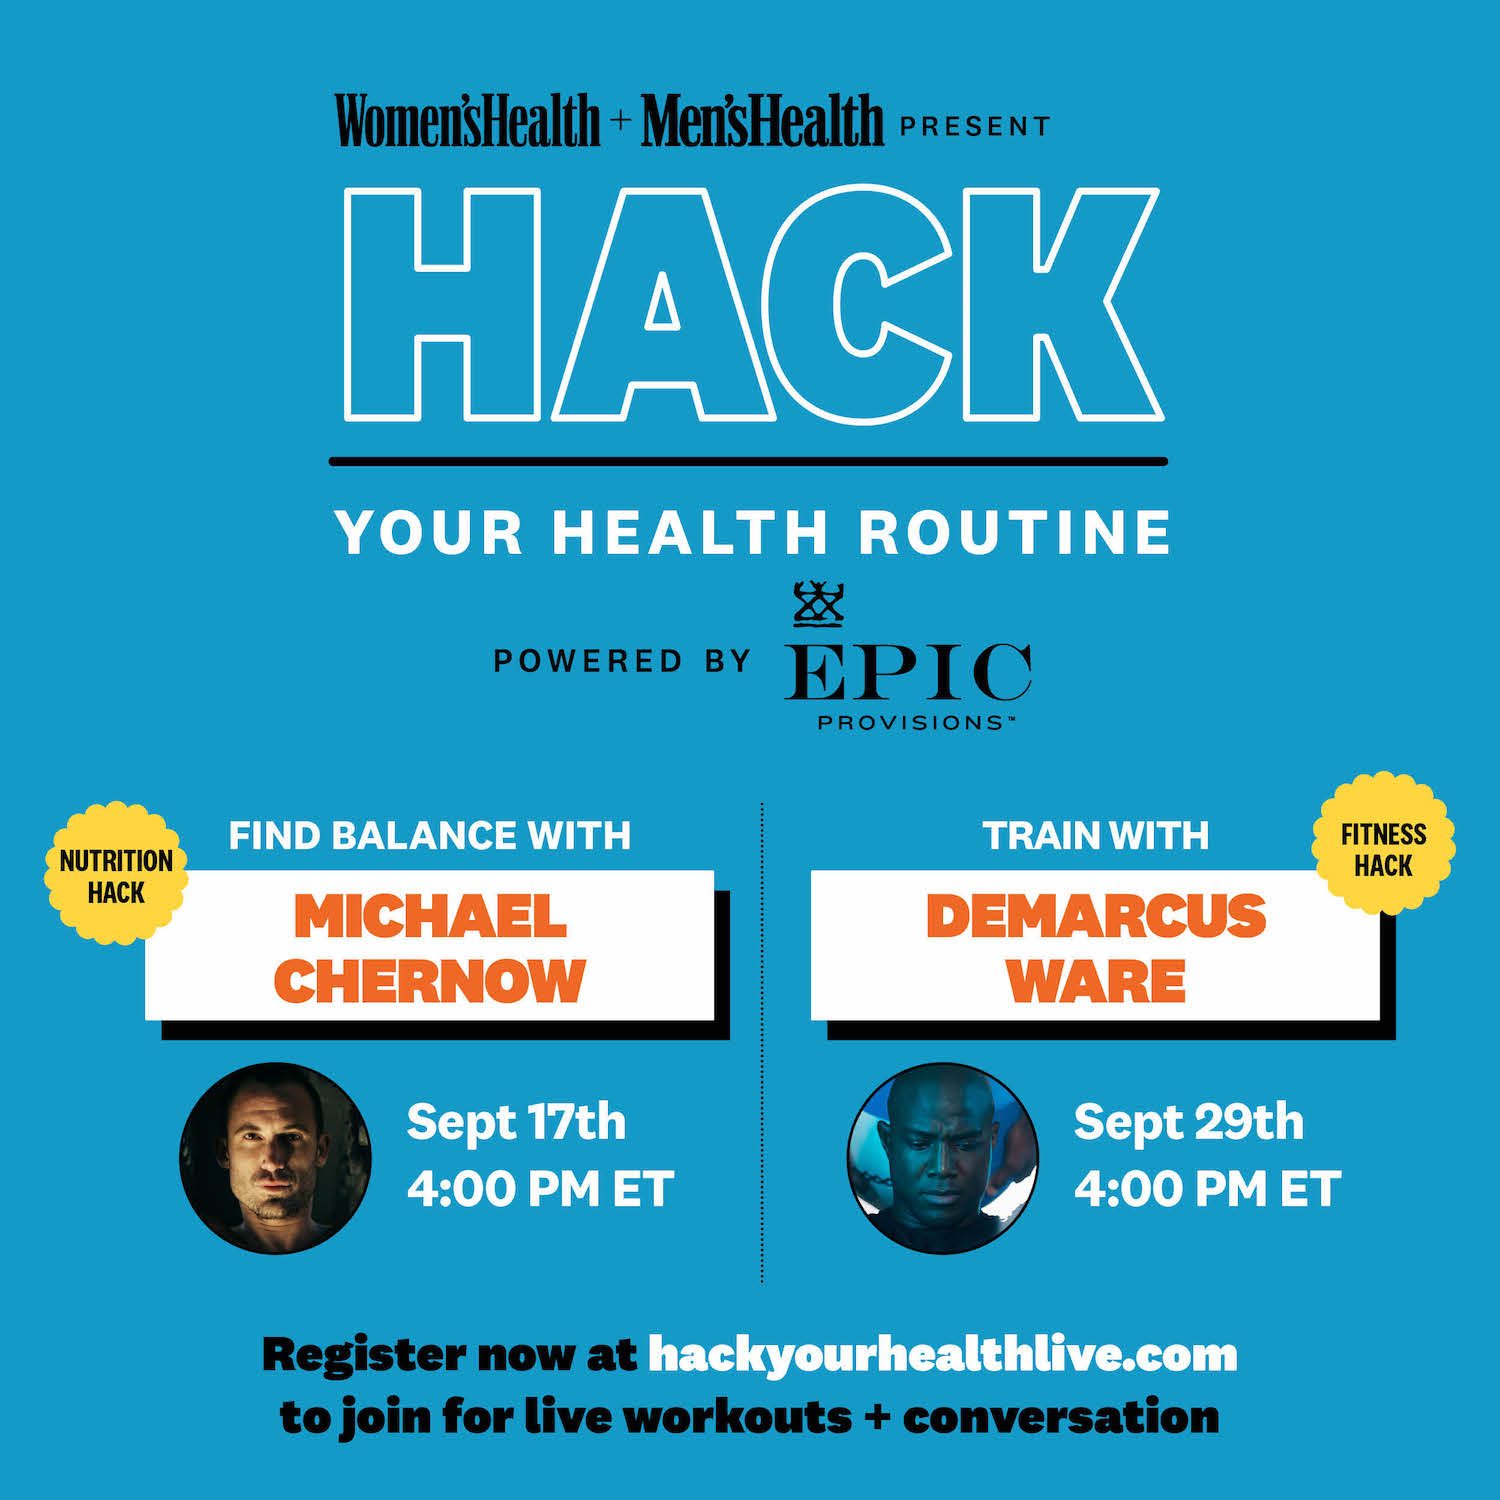 Women's Health + Men's Health Present Hack Your Health Routine (Powered by Epic Provisions)! Register now at hackyourhealthlive.com to join for live workouts and conversation!